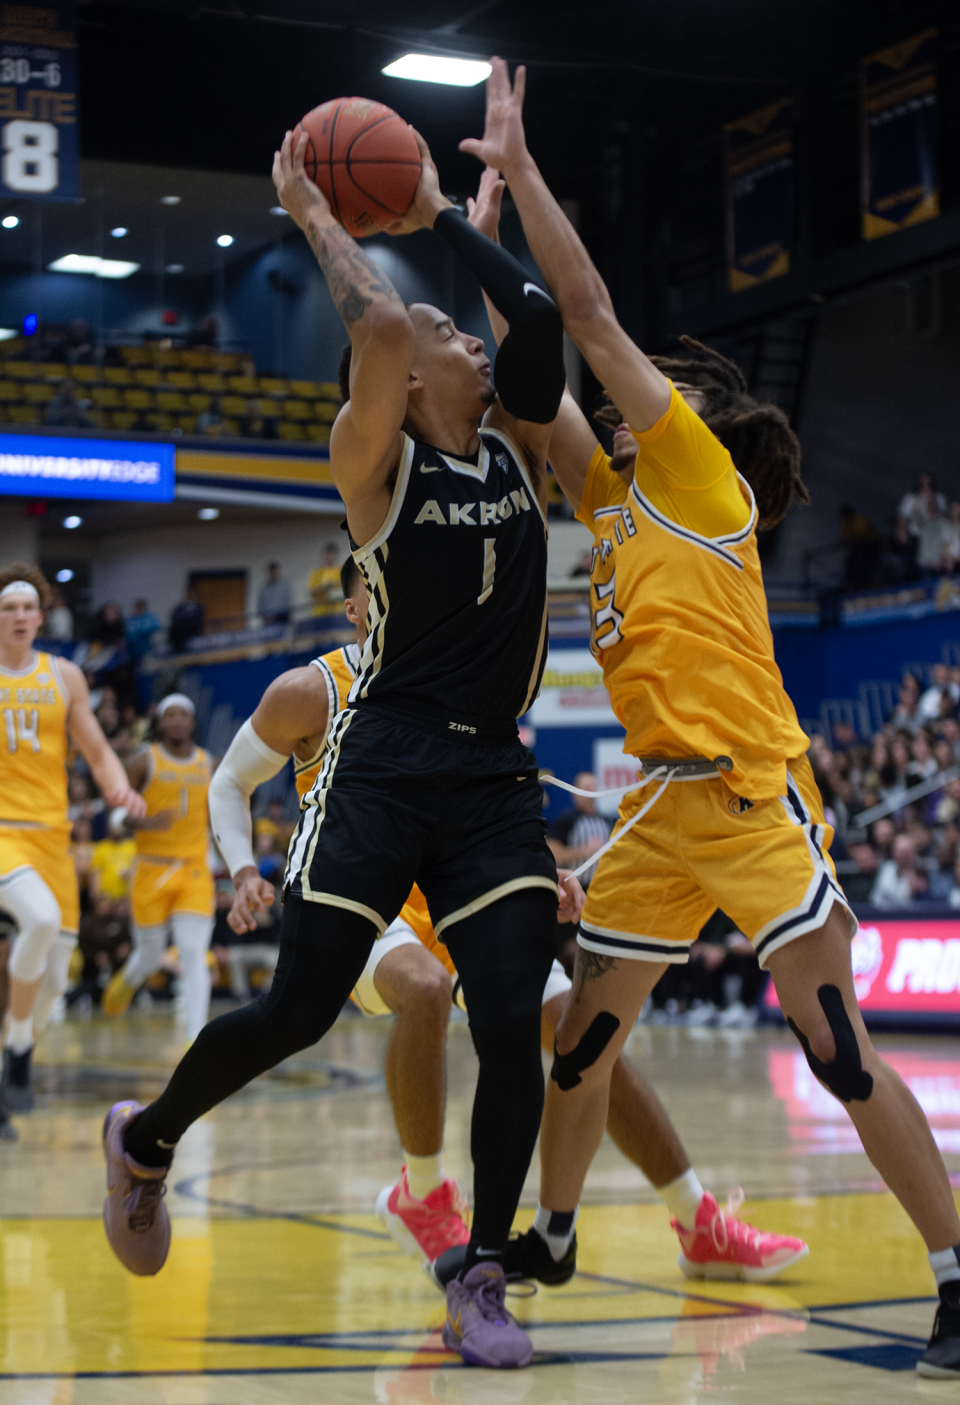 Akron's Shammah Scott takes a shot while being defended by Kent State's Jalen Sullinger during Friday's game.